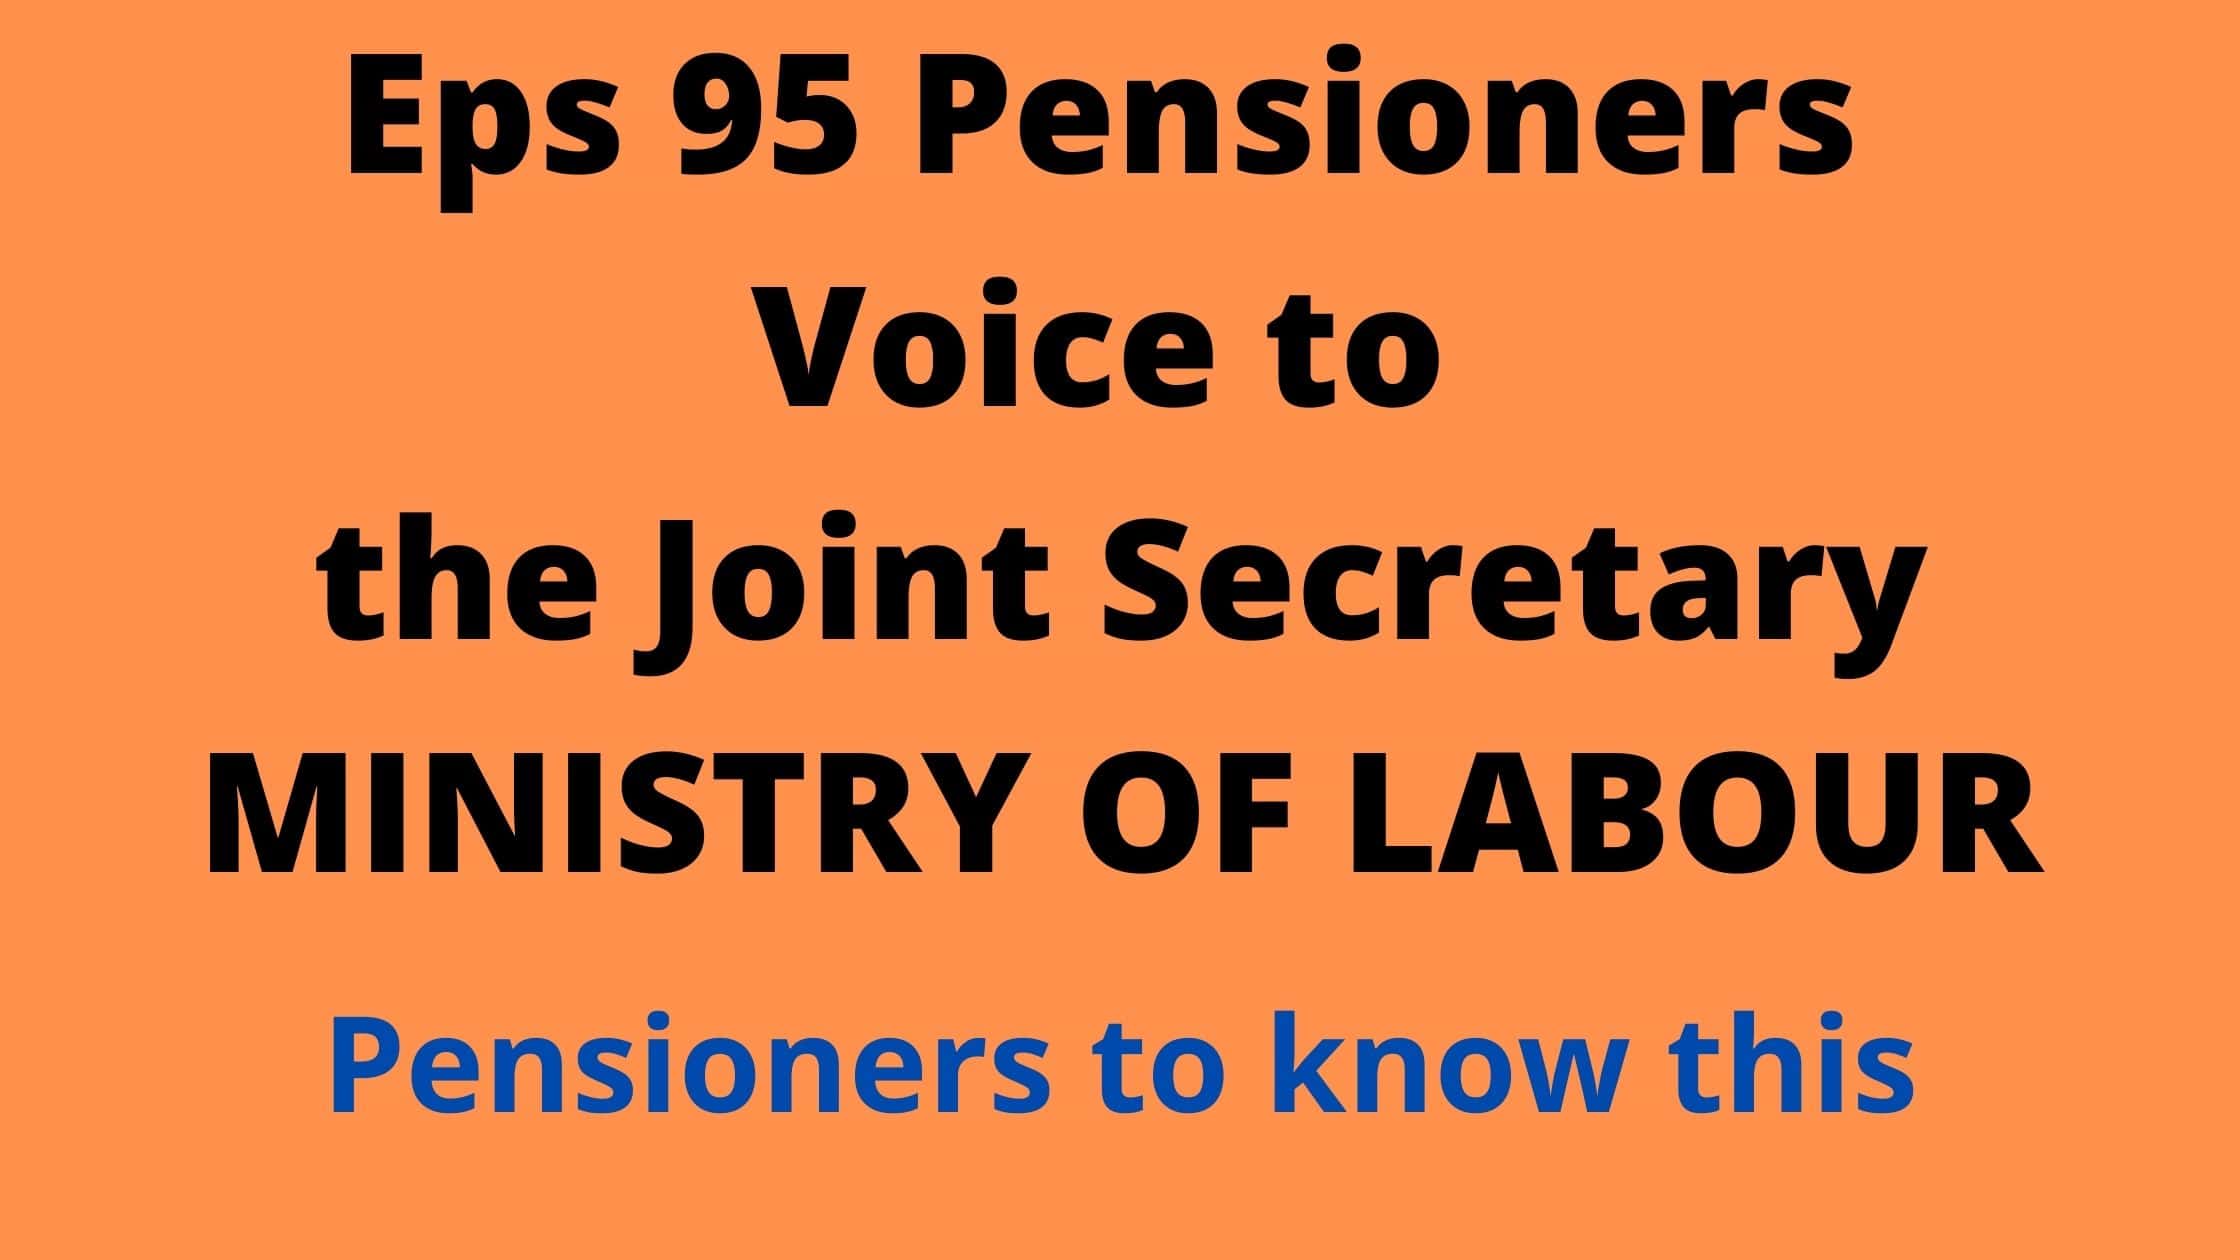 Eps 95 Pensioners Voice to the Joint Secretary